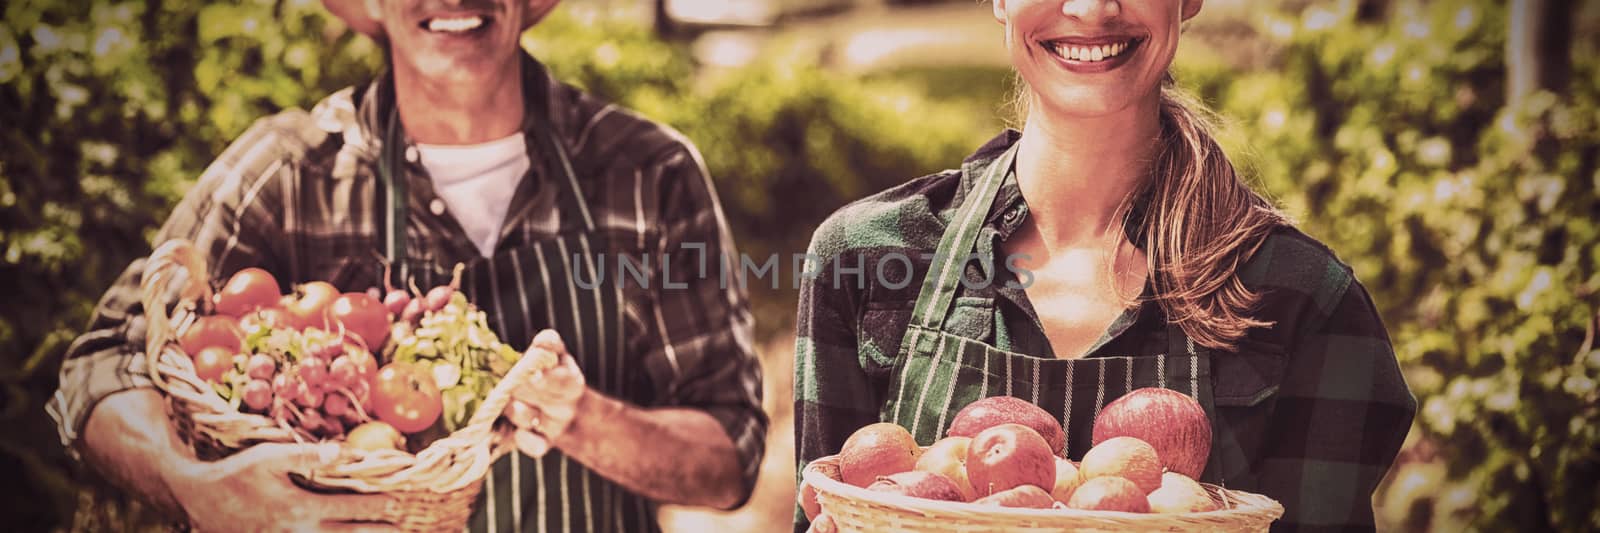 Portrait of happy farmer couple holding baskets of vegetables and fruits in the vineyard